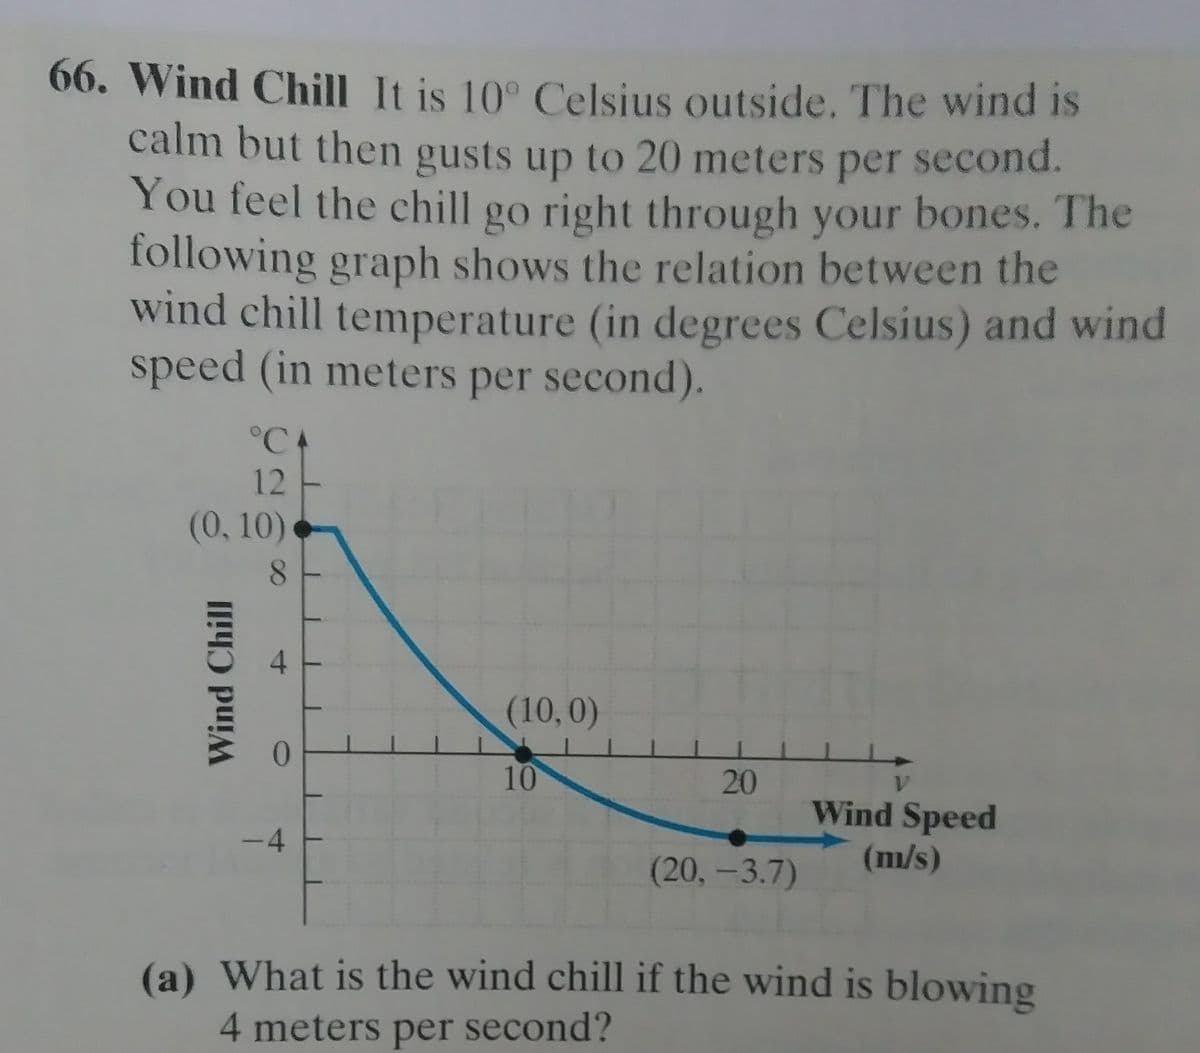 66. Wind Chill It is 10° Celsius outside. The wind is
calm but then gusts up to 20 meters per second.
You feel the chill go right through your bones. The
following graph shows the relation between the
wind chill temperature (in degrees Celsius) and wind
speed (in meters per second).
°C4
12 -
(0,10)
(10,0)
0.
10
20
Wind Speed
(m/s)
(20, -3.7)
(a) What is the wind chill if the wind is blowing
4 meters per second?
8.
4.
4.
Wind Chill
